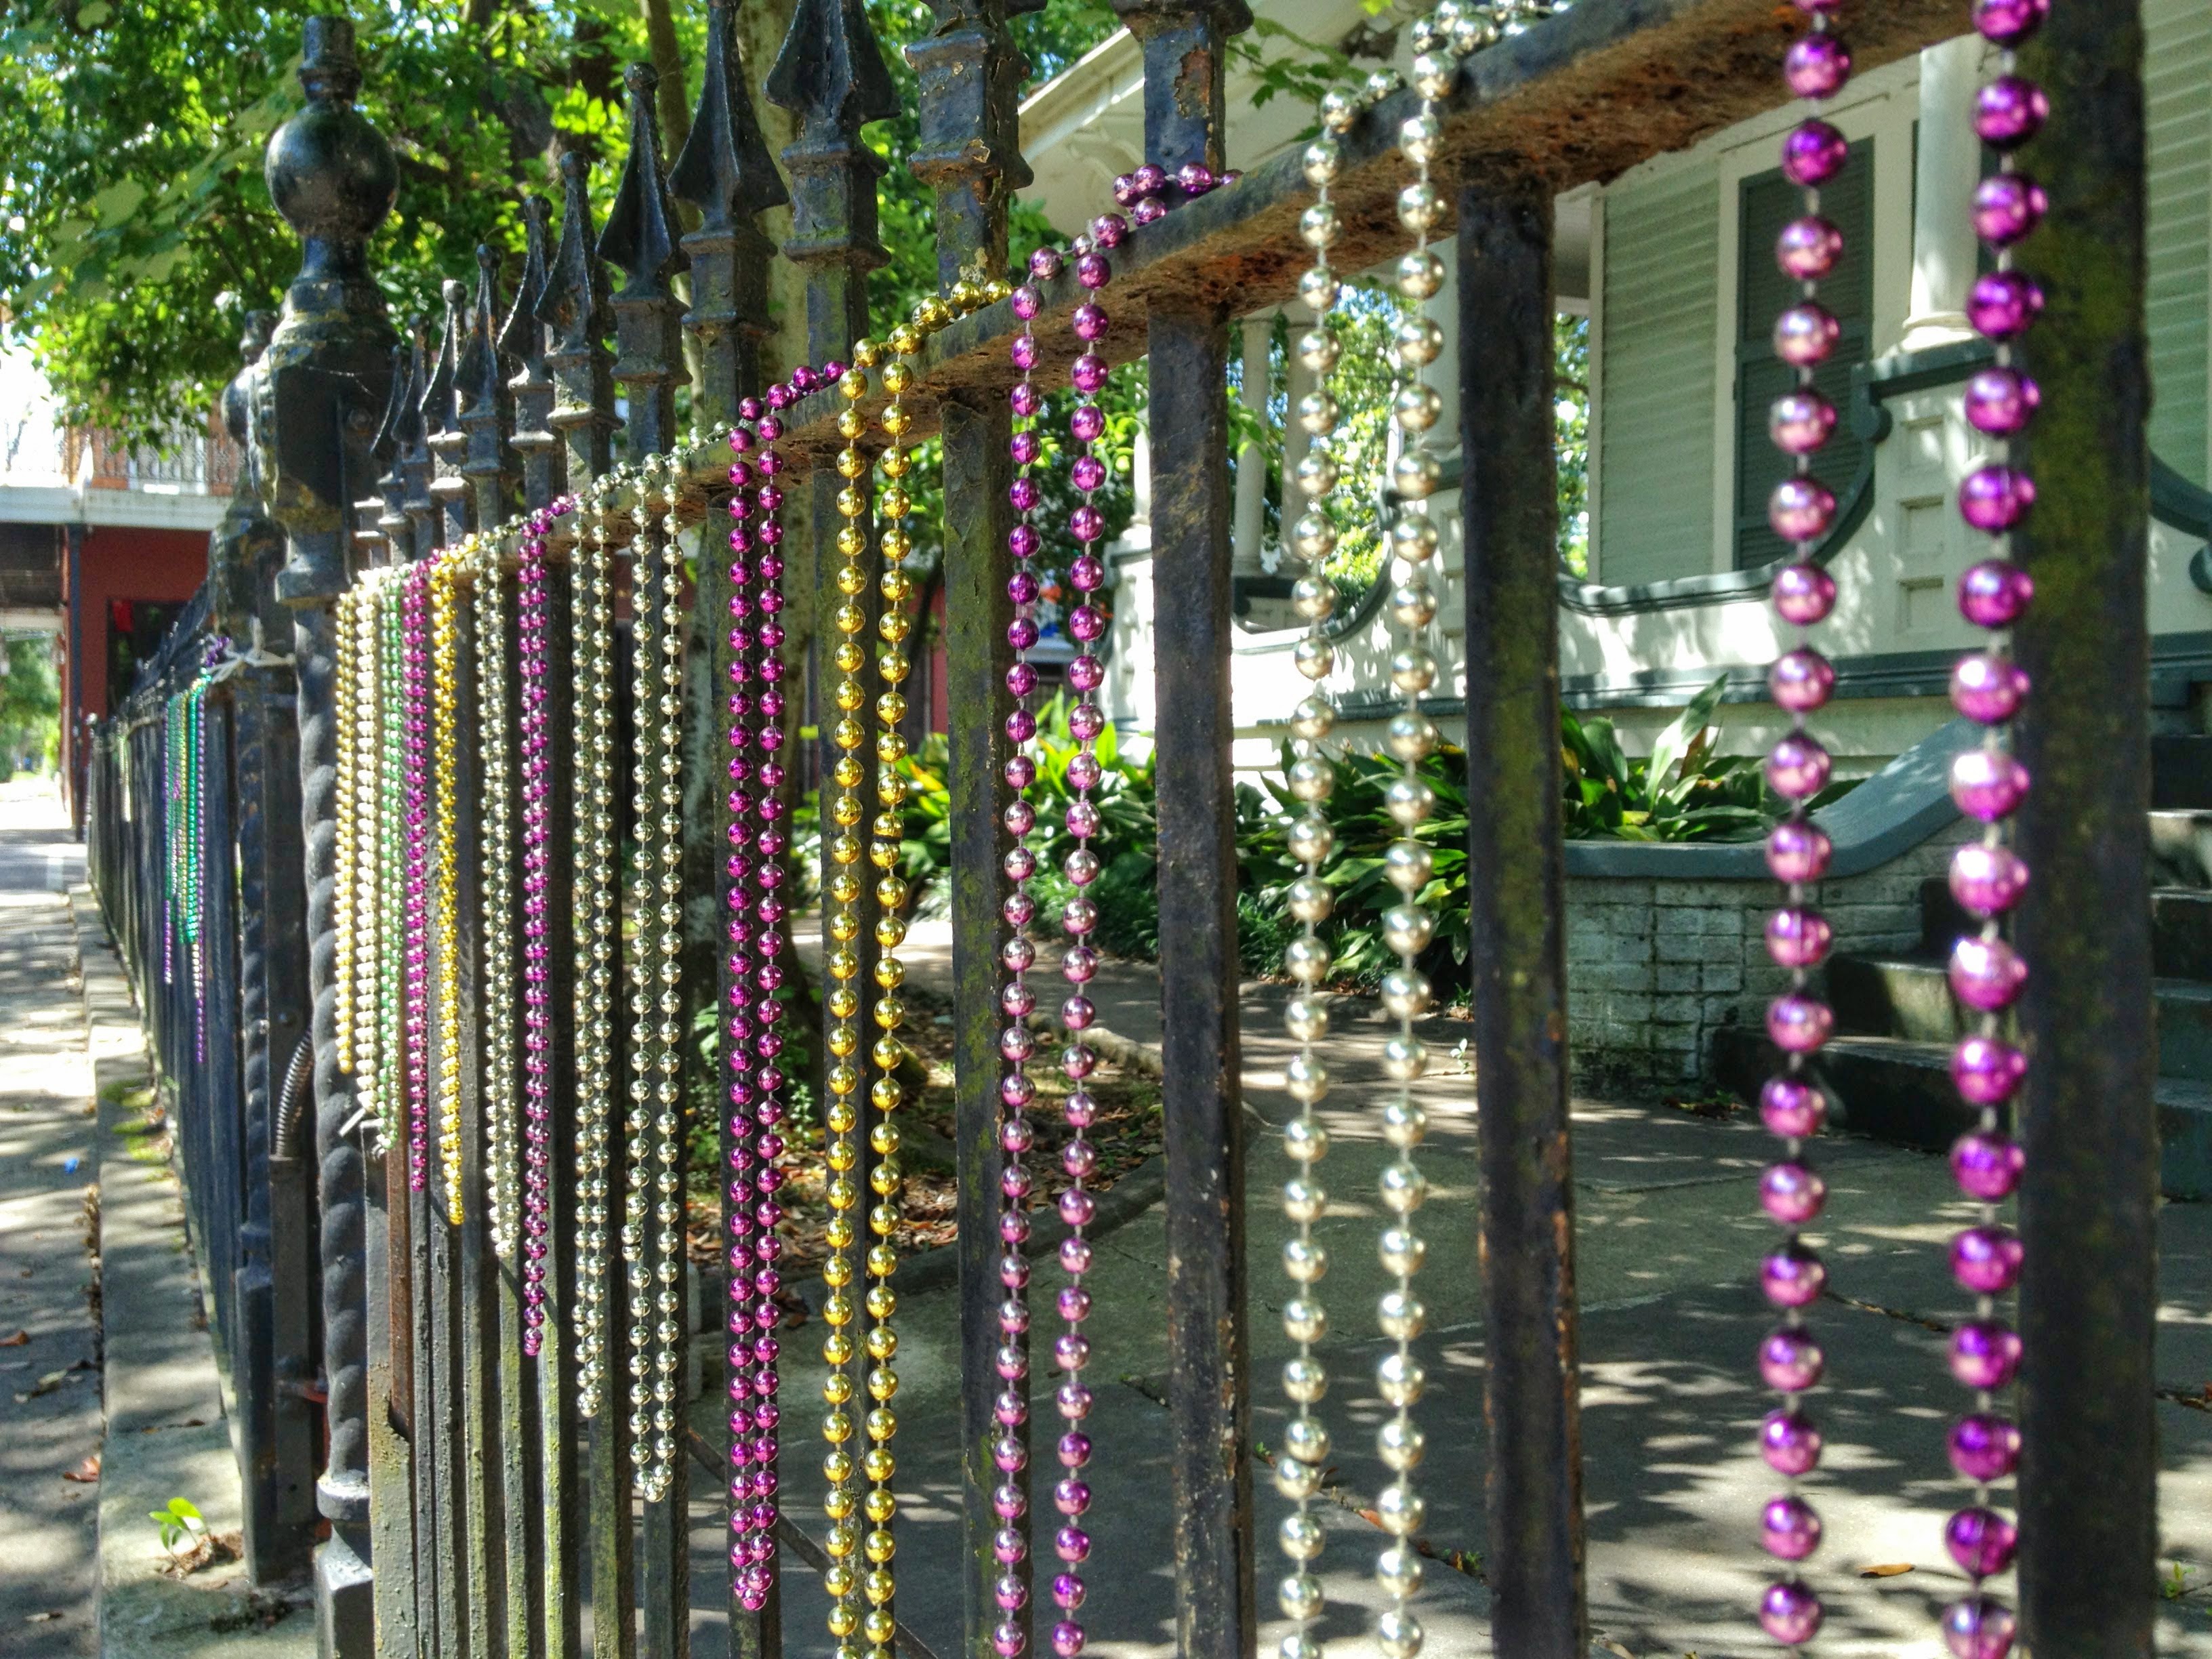 Beads hanging outside of a New Orleans house